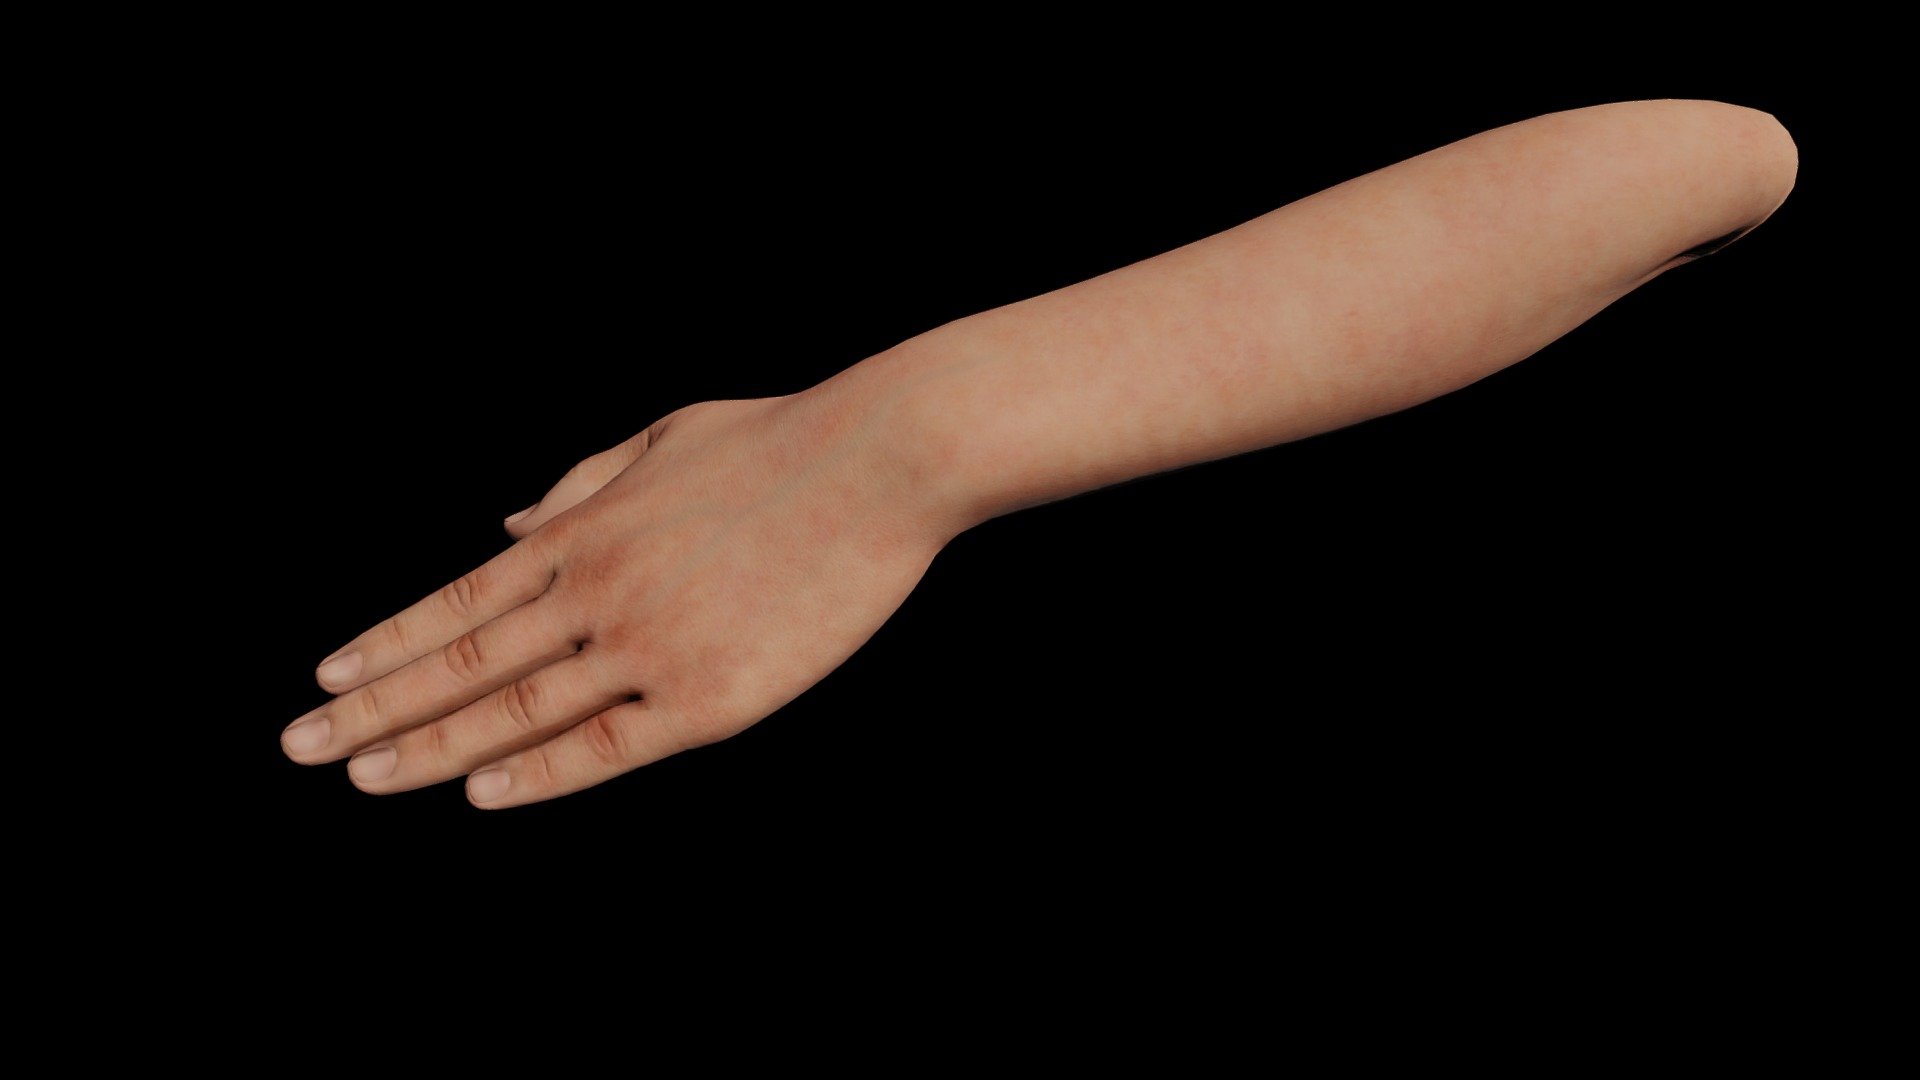 Rigged and animated left hand model, made in Blender 3.2 3d model